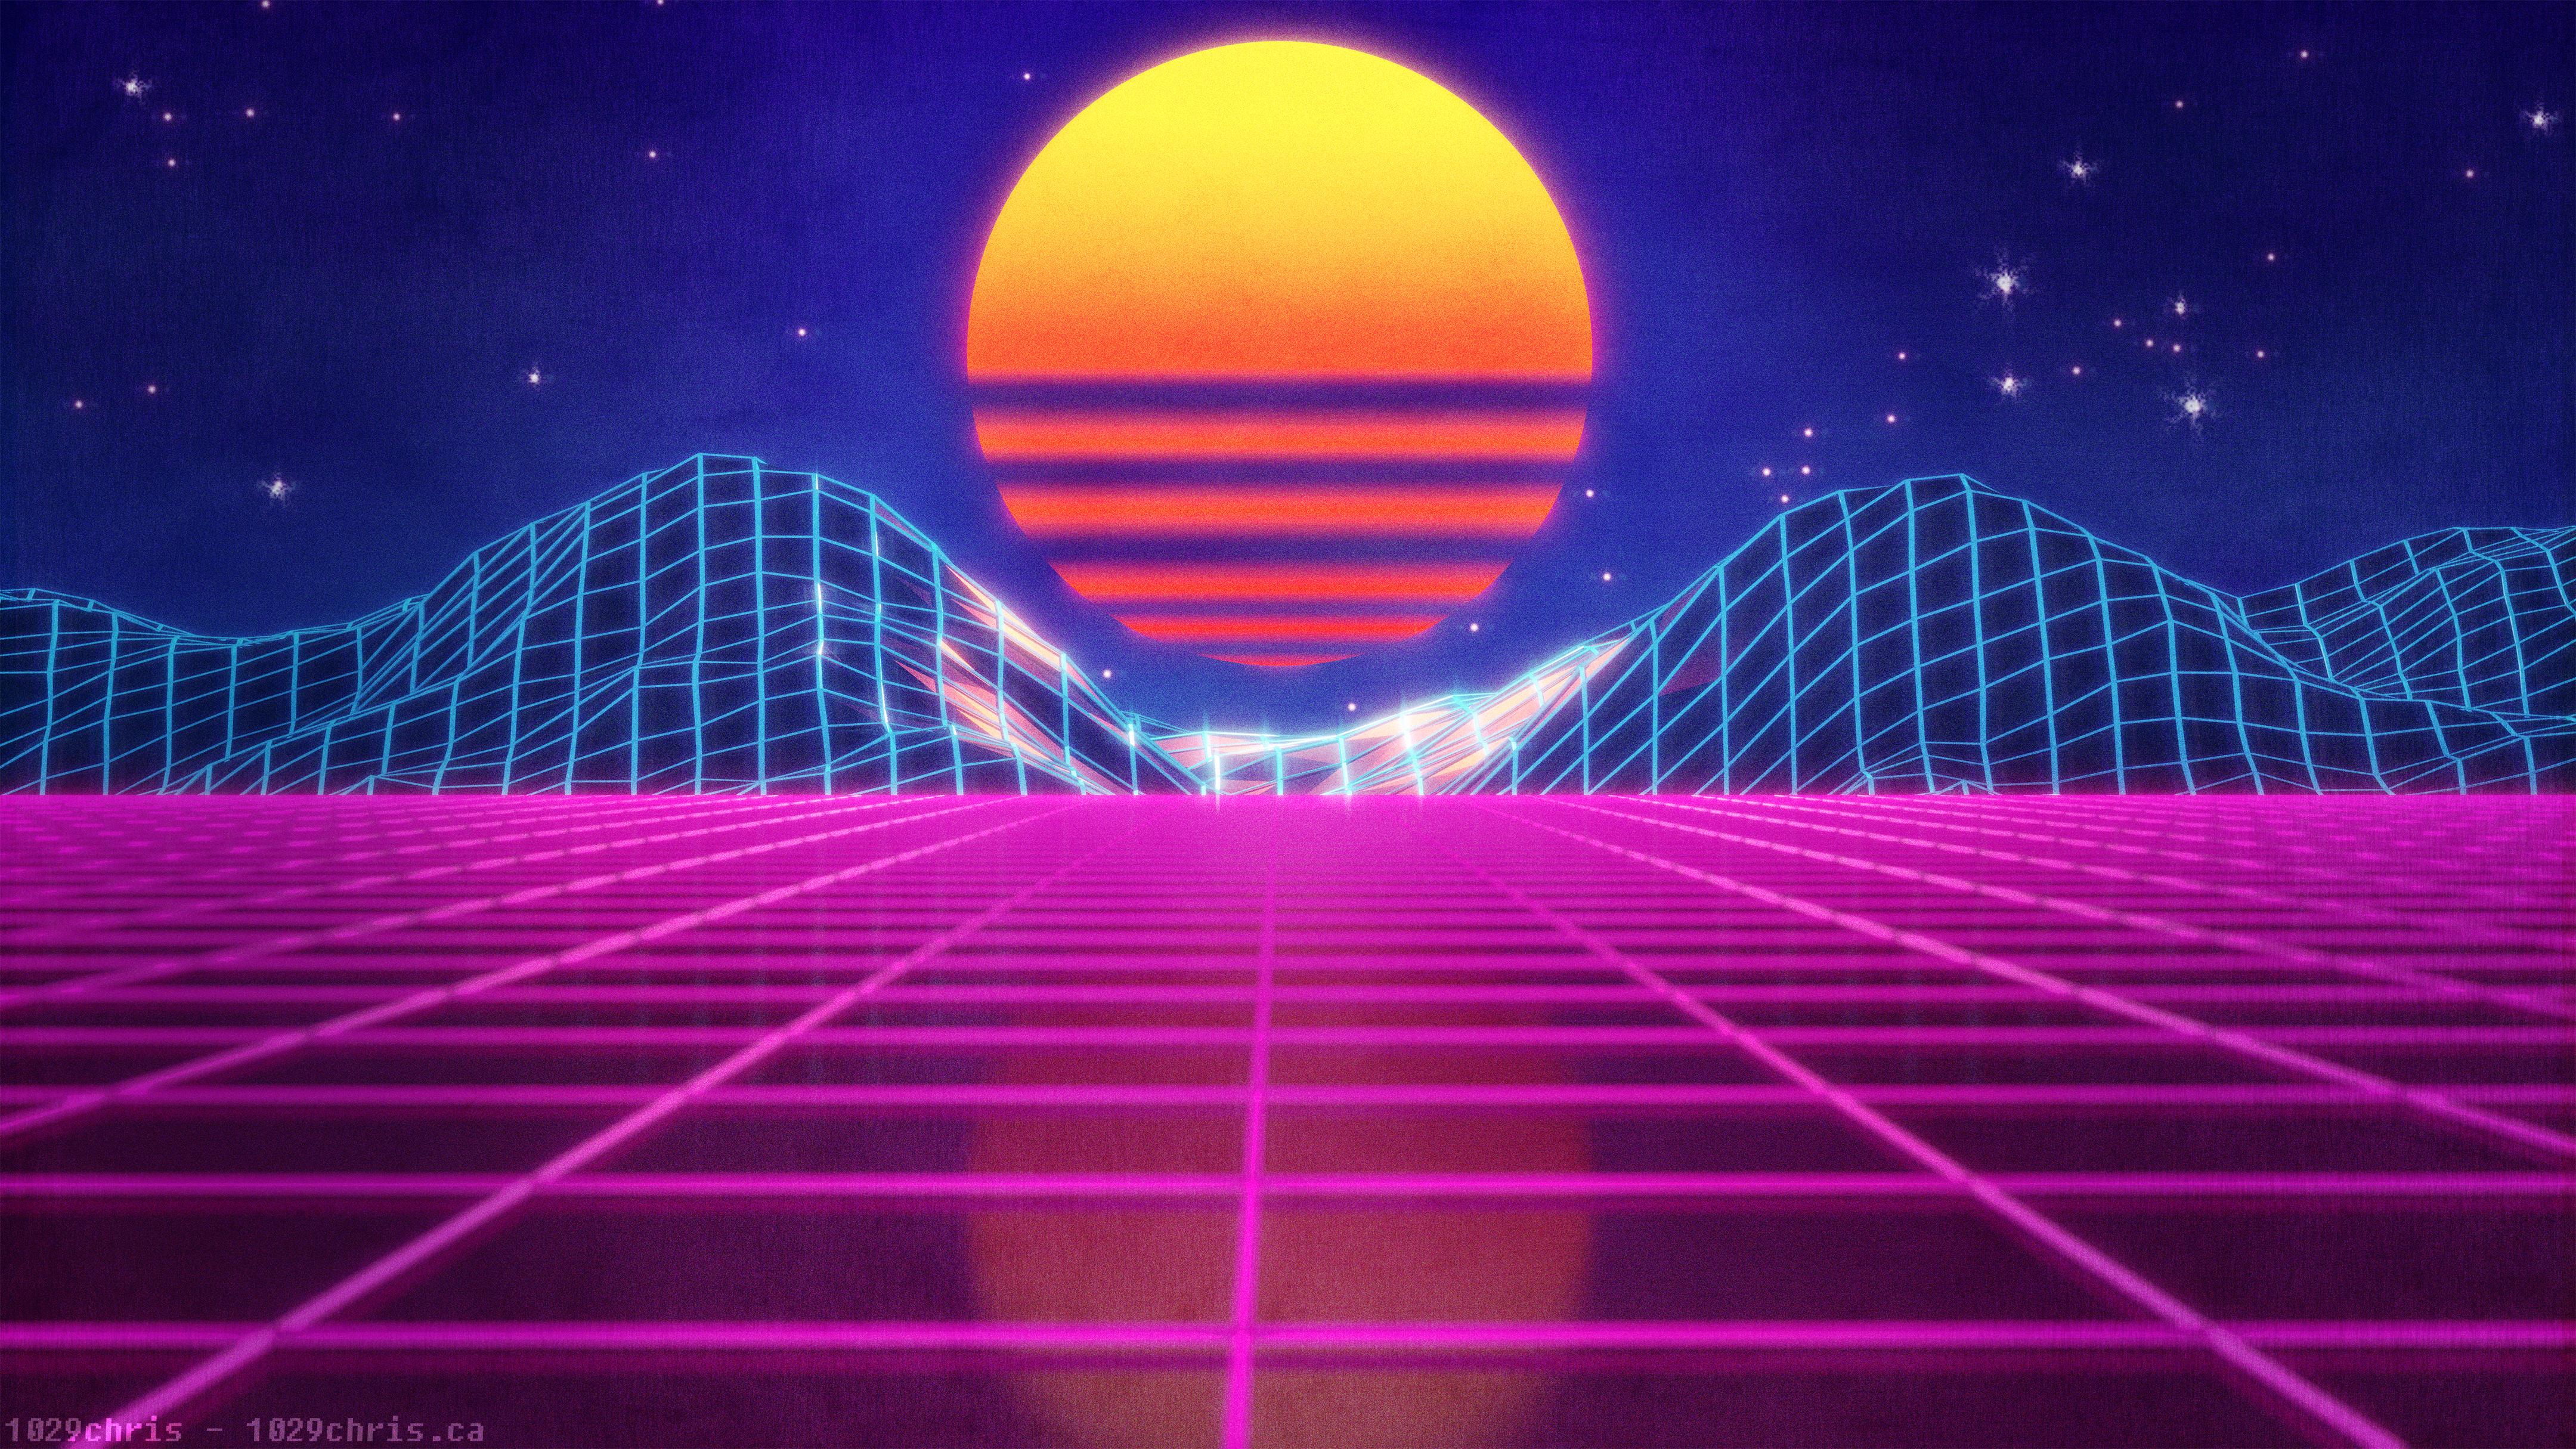 NEON VALLEY I created in Blender